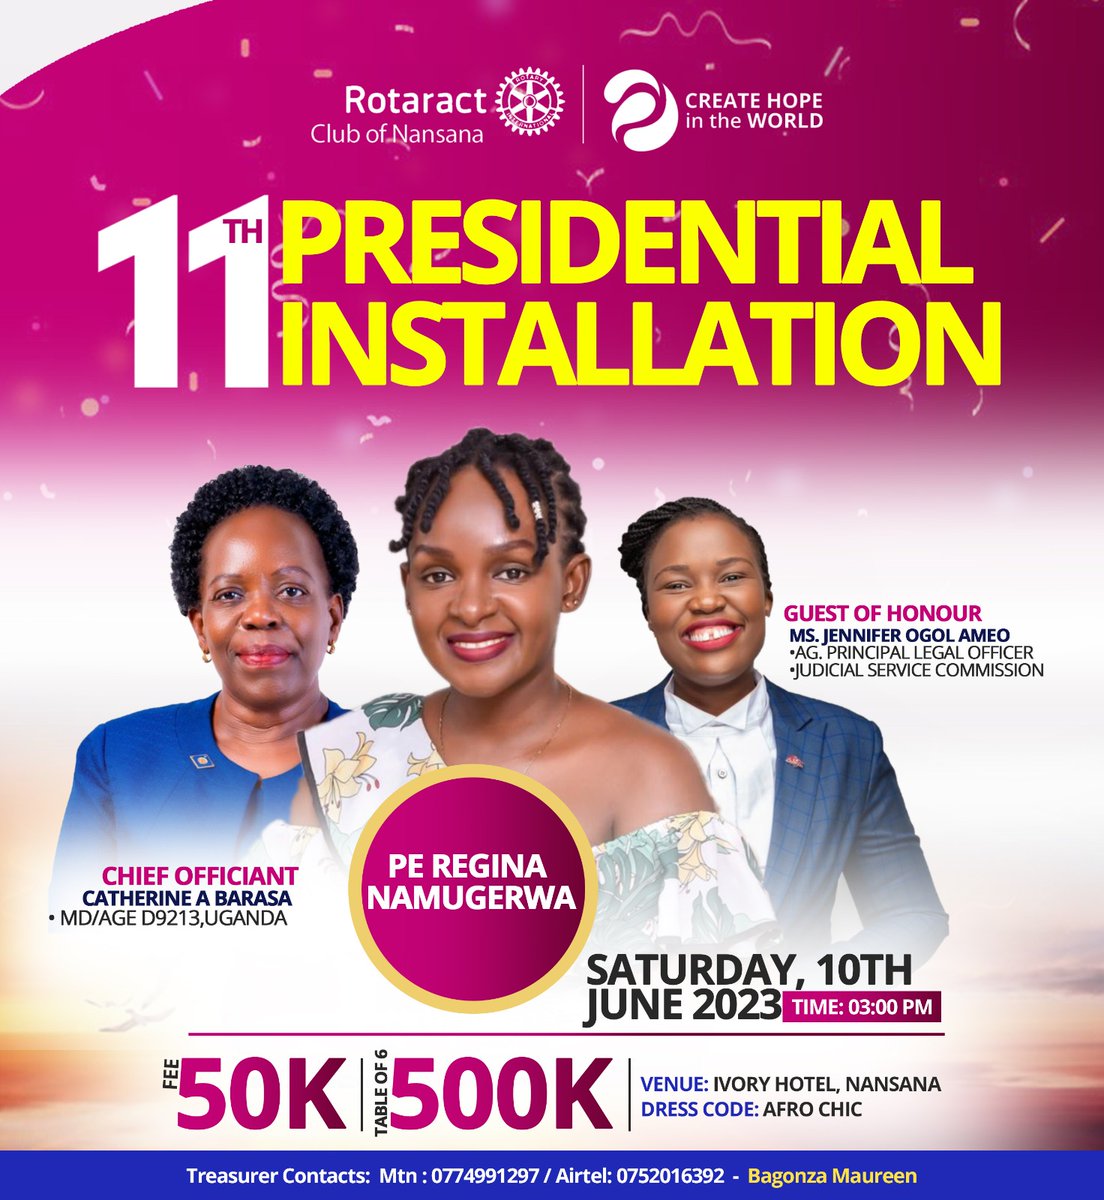 Tomorrow is the big day, come join us as we install the 11th president at @rctnansana and celebrate the achievements this year. #11PresidentialInstallation #RacNansana #WearetheTitans #CreateHope